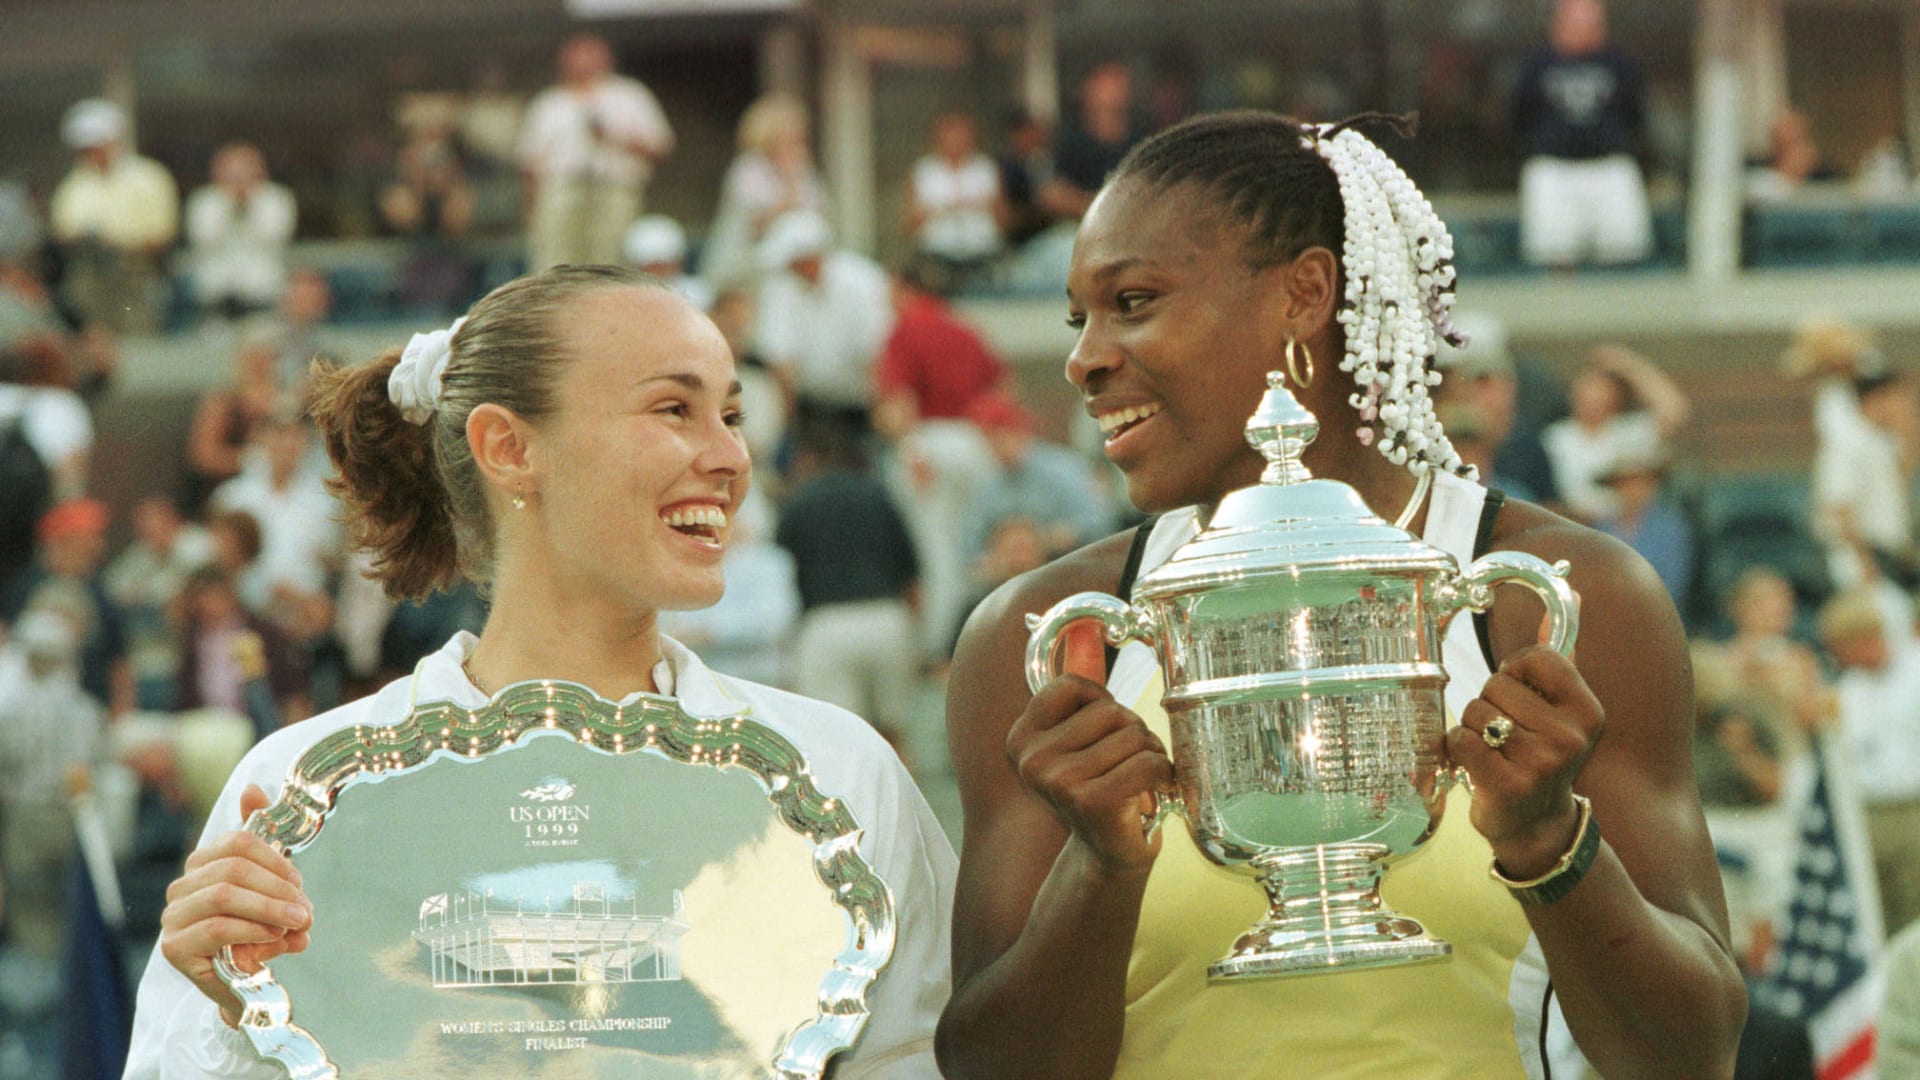 The Matches that Serena GOAT: Williams Martina Hingis, US Open final